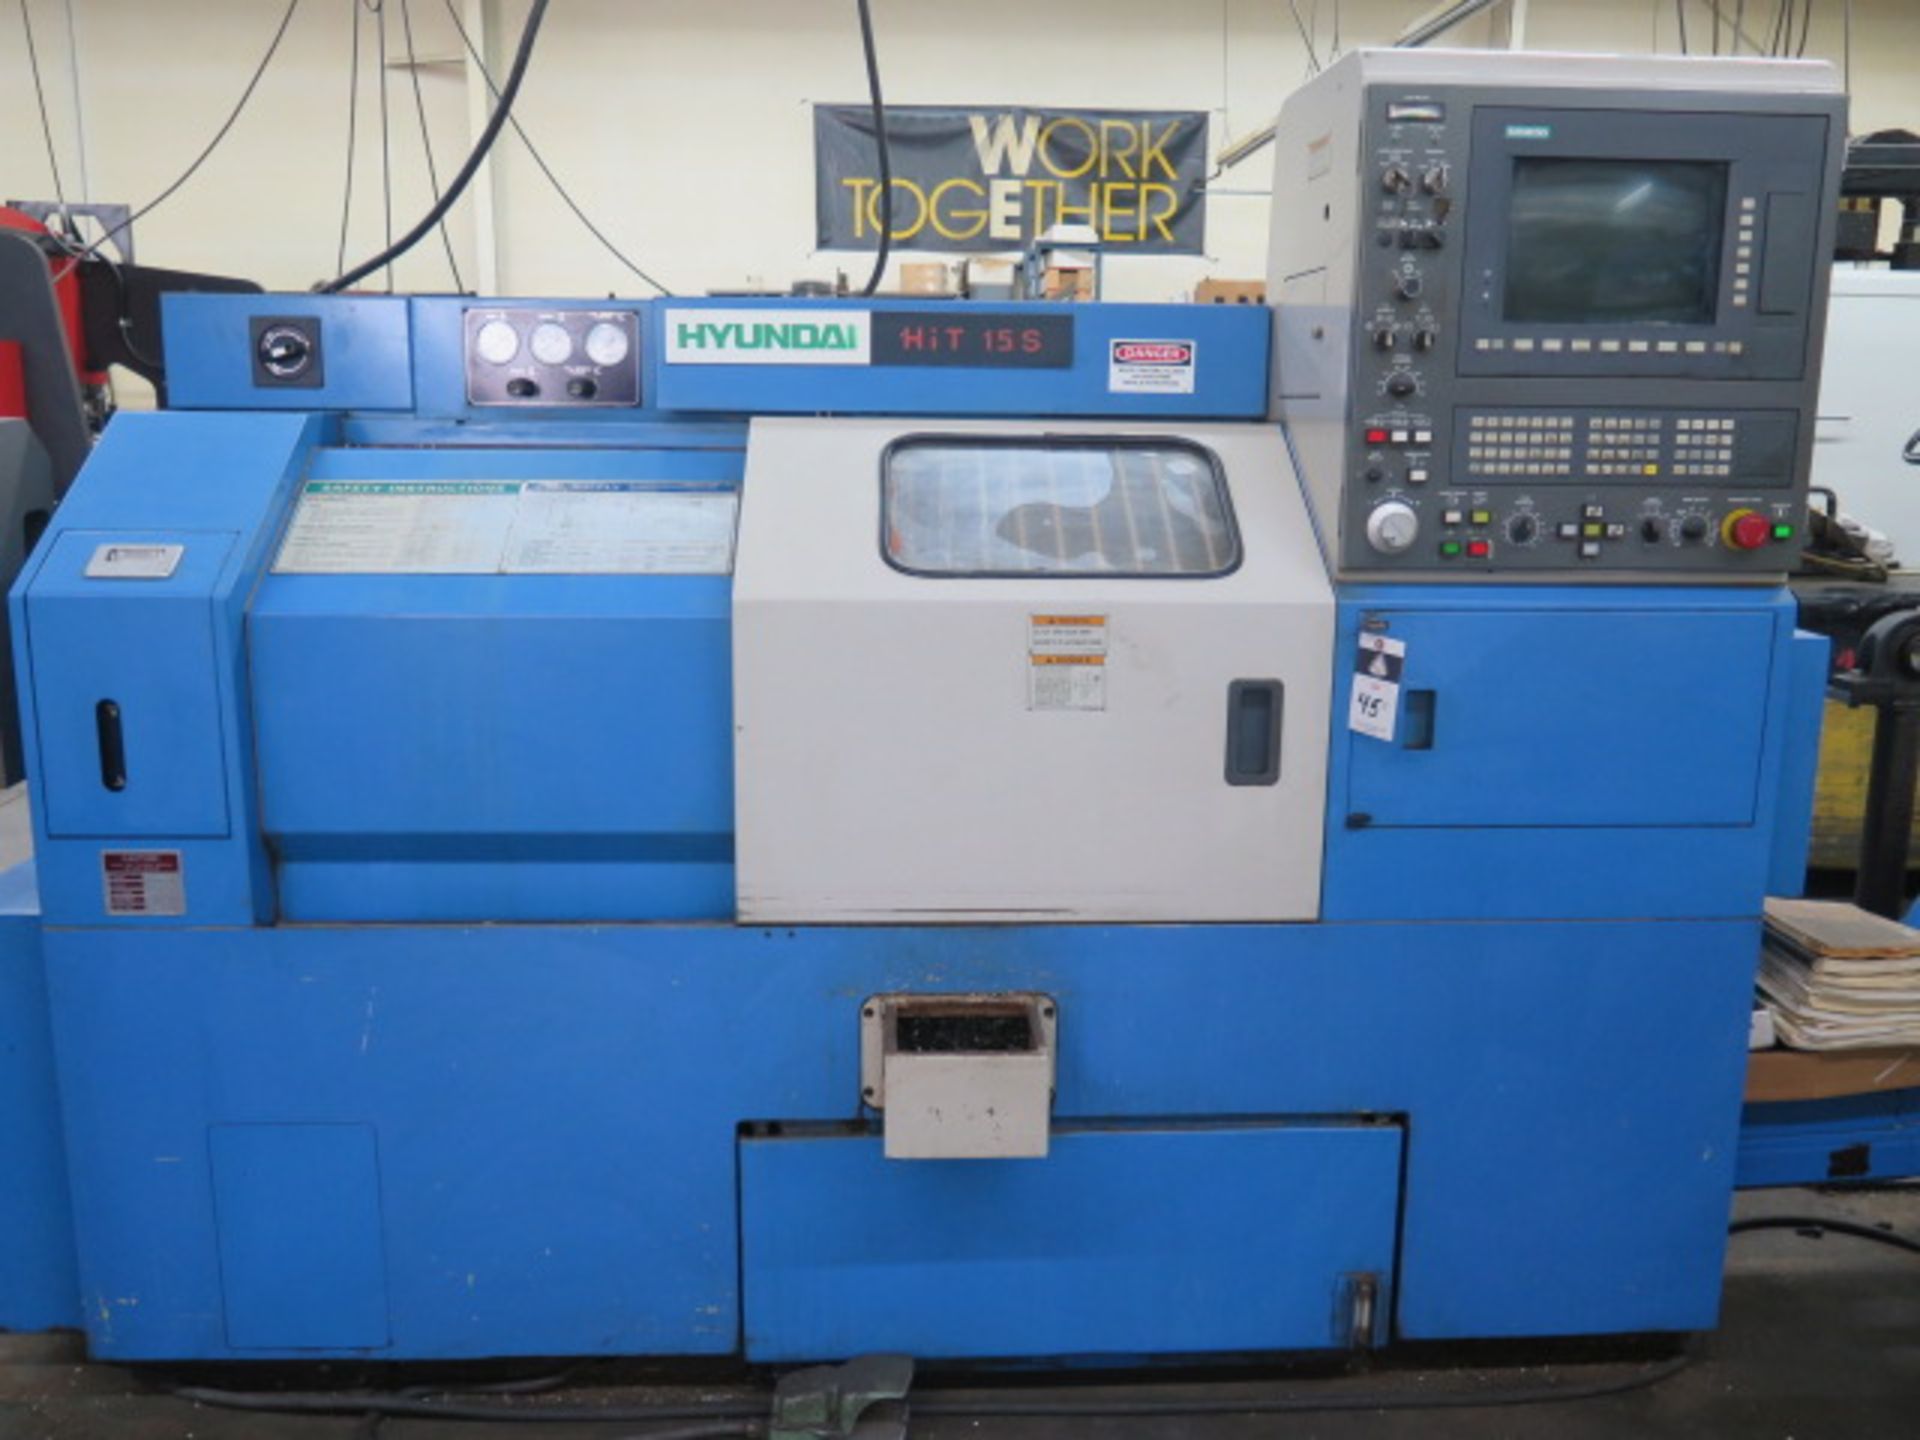 Hyundai HiT 15S CNC Turning Center s/n 5-009 w/ Siemens Controls, Tool Presetter, SOLD AS IS